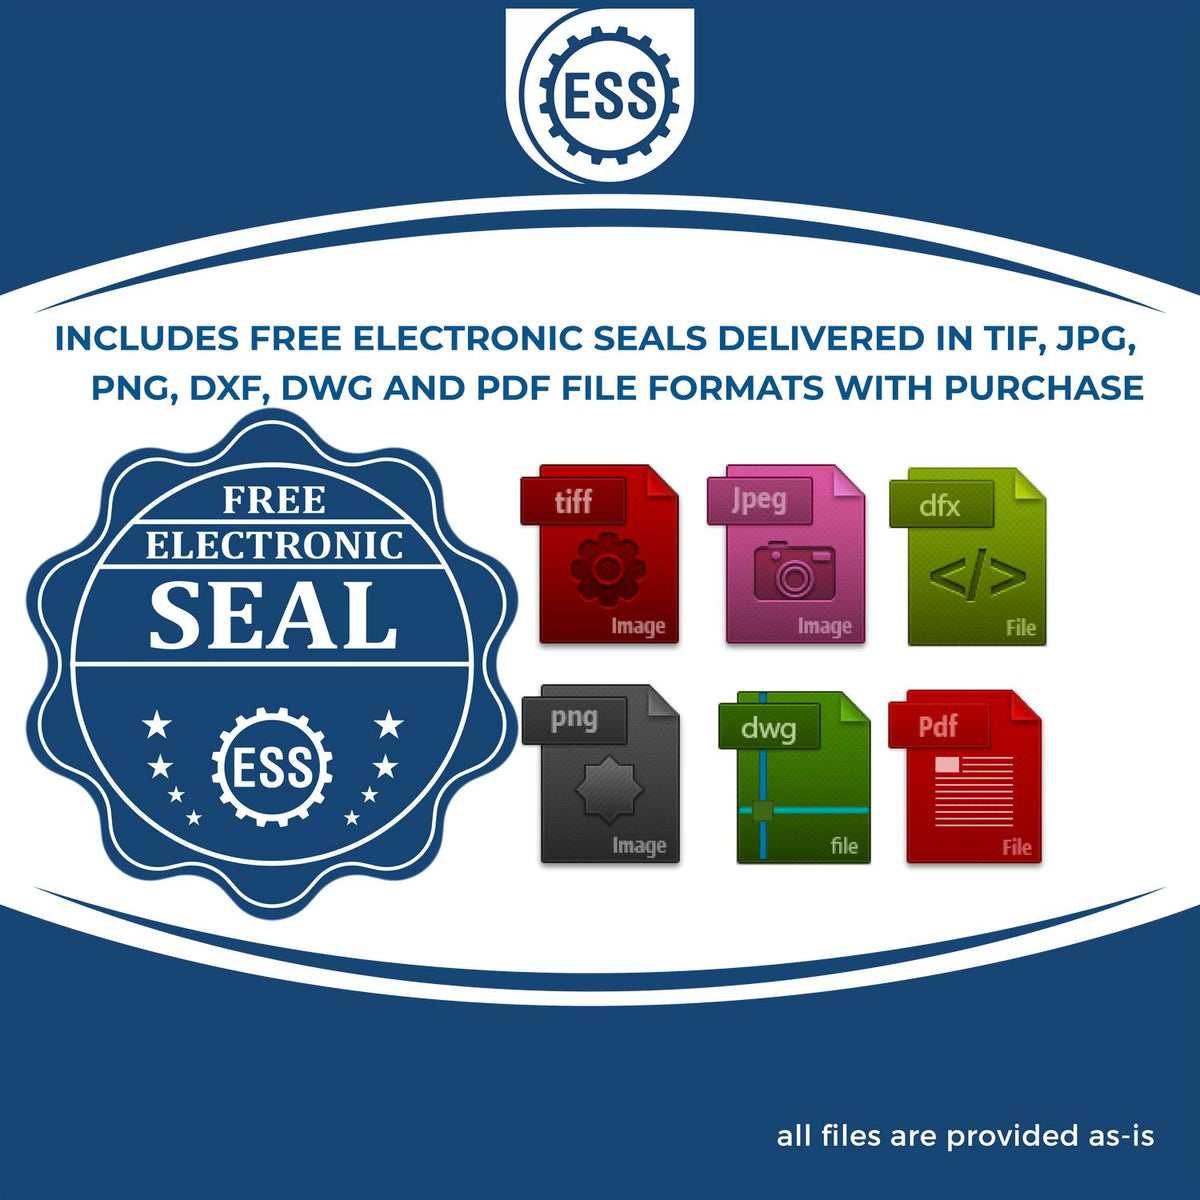 An infographic for the free electronic seal for the Self-Inking Ohio Landscape Architect Stamp illustrating the different file type icons such as DXF, DWG, TIF, JPG and PNG.